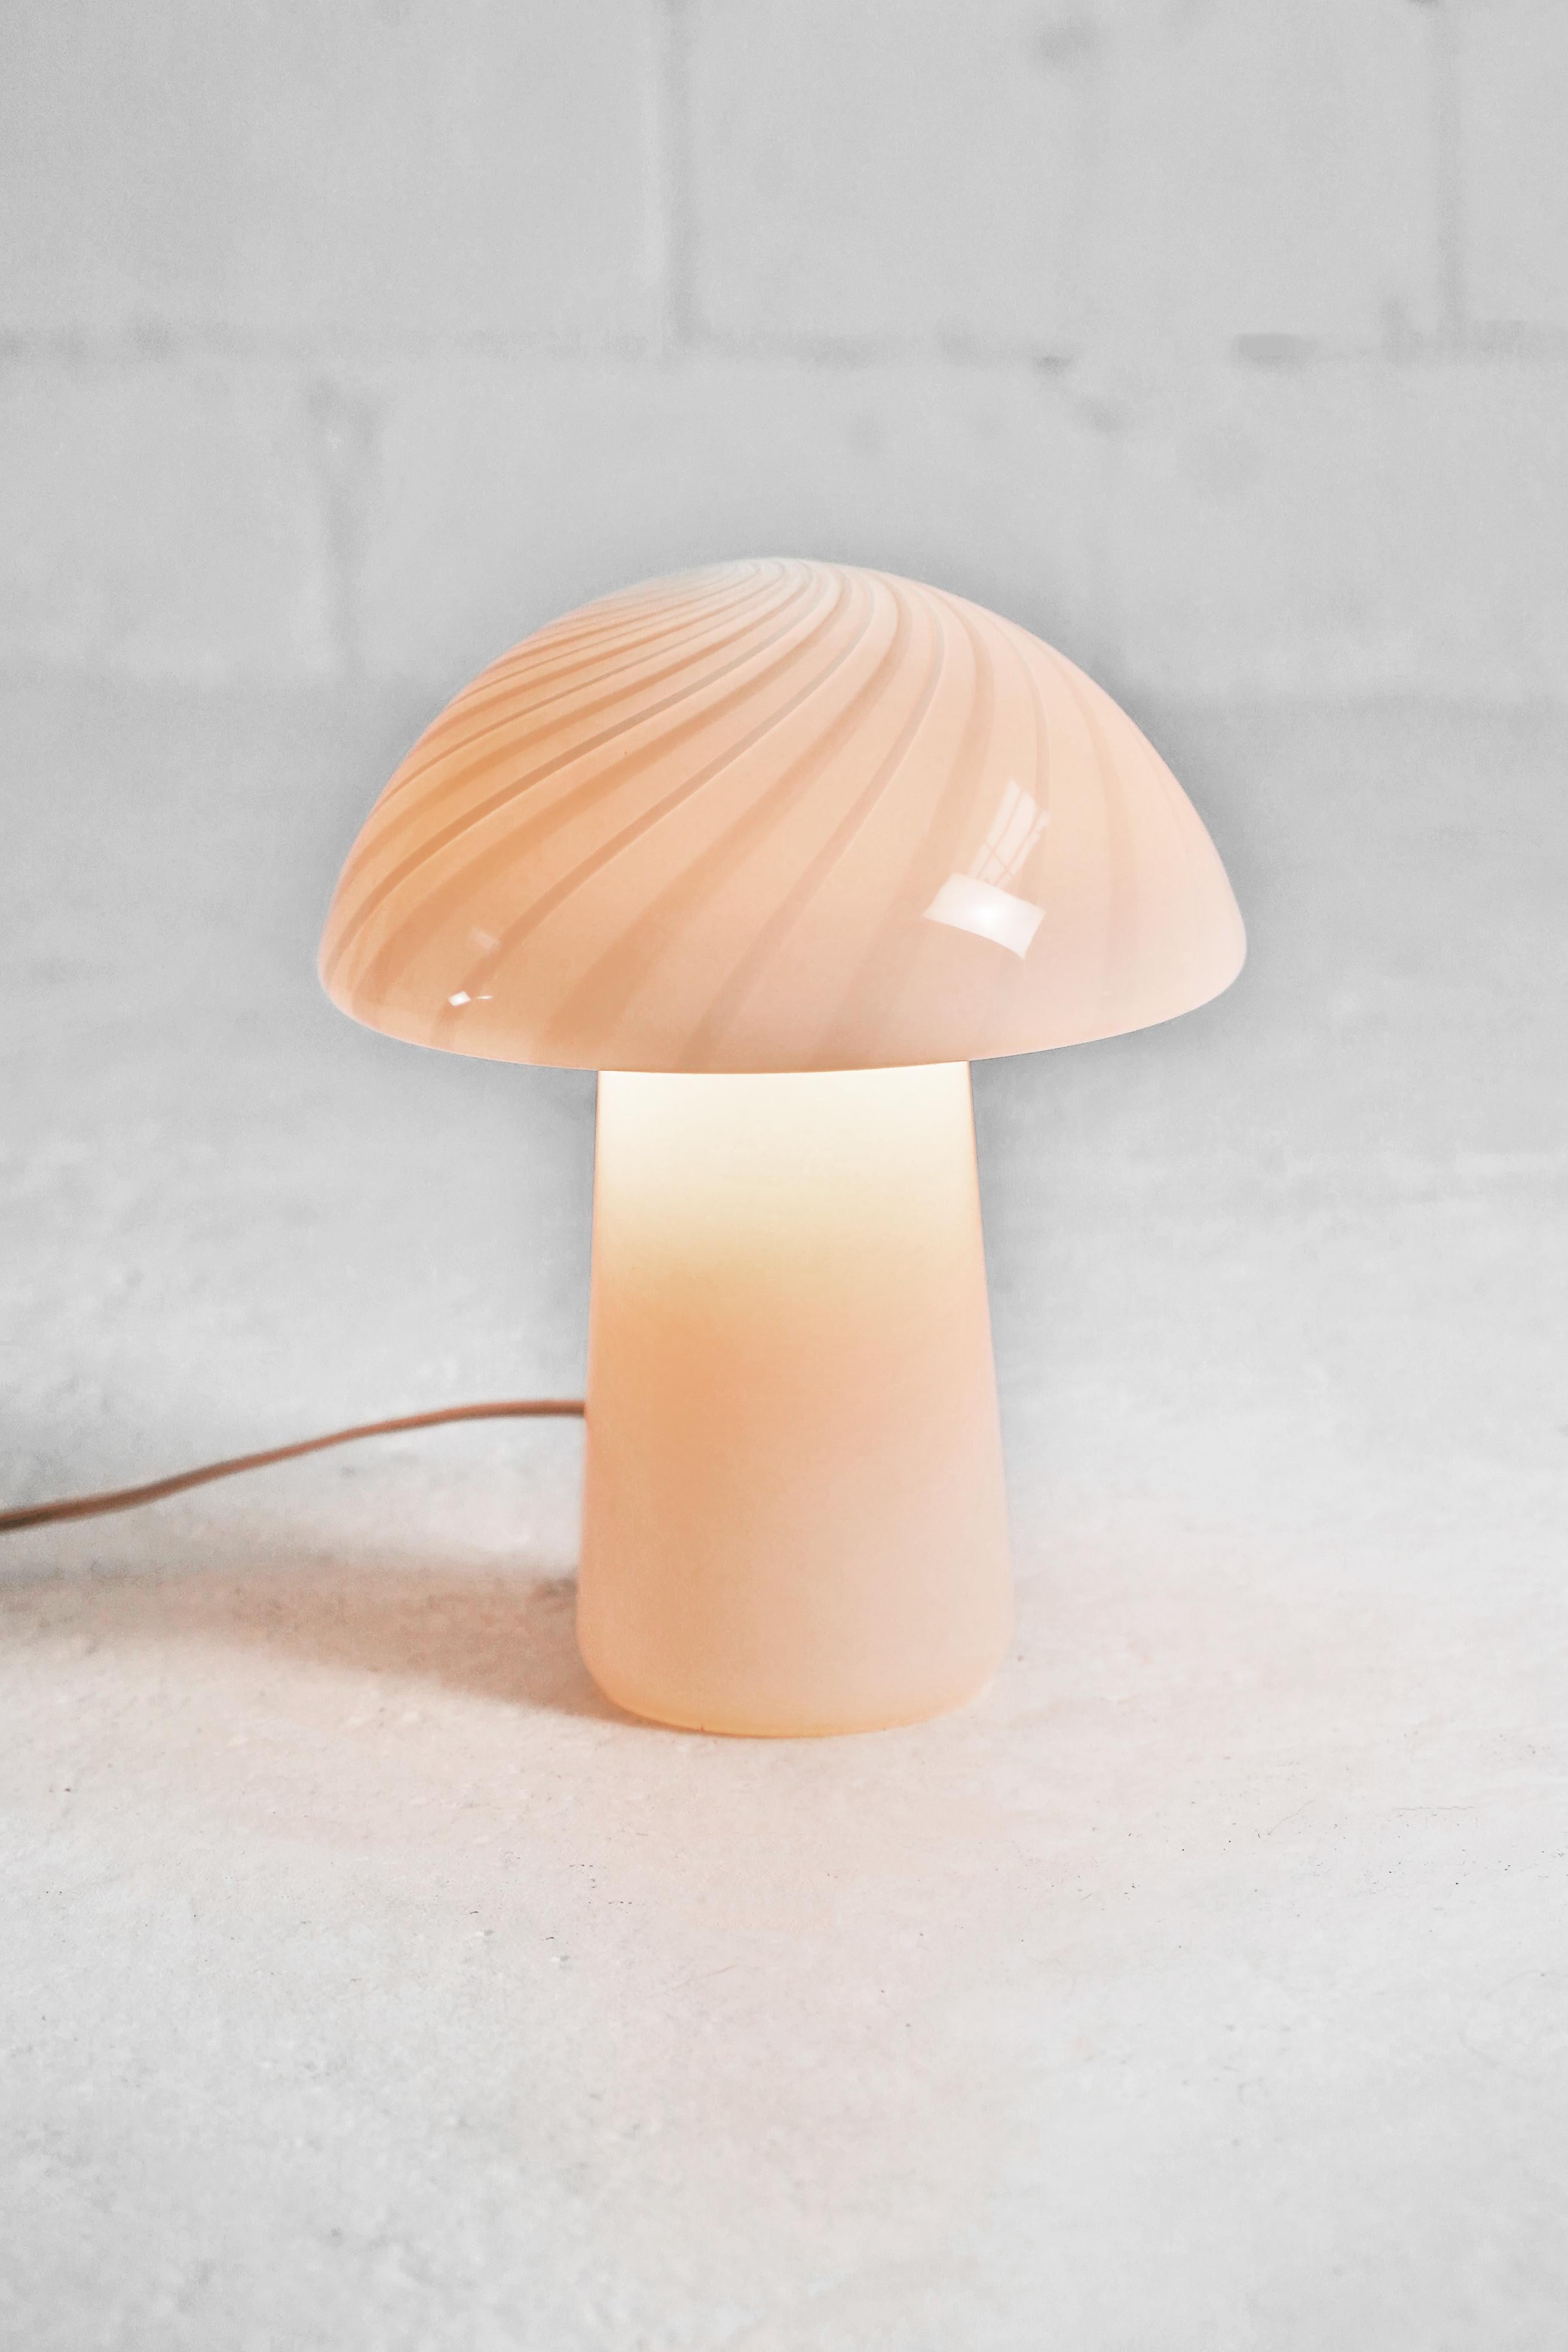 Stunning white Murano glass mushroom lamp in a slender profile. A great piece to add to your collection. In amazing vintage condition, working perfectly creating a beautiful patterned swirl on glass, shown in photos.